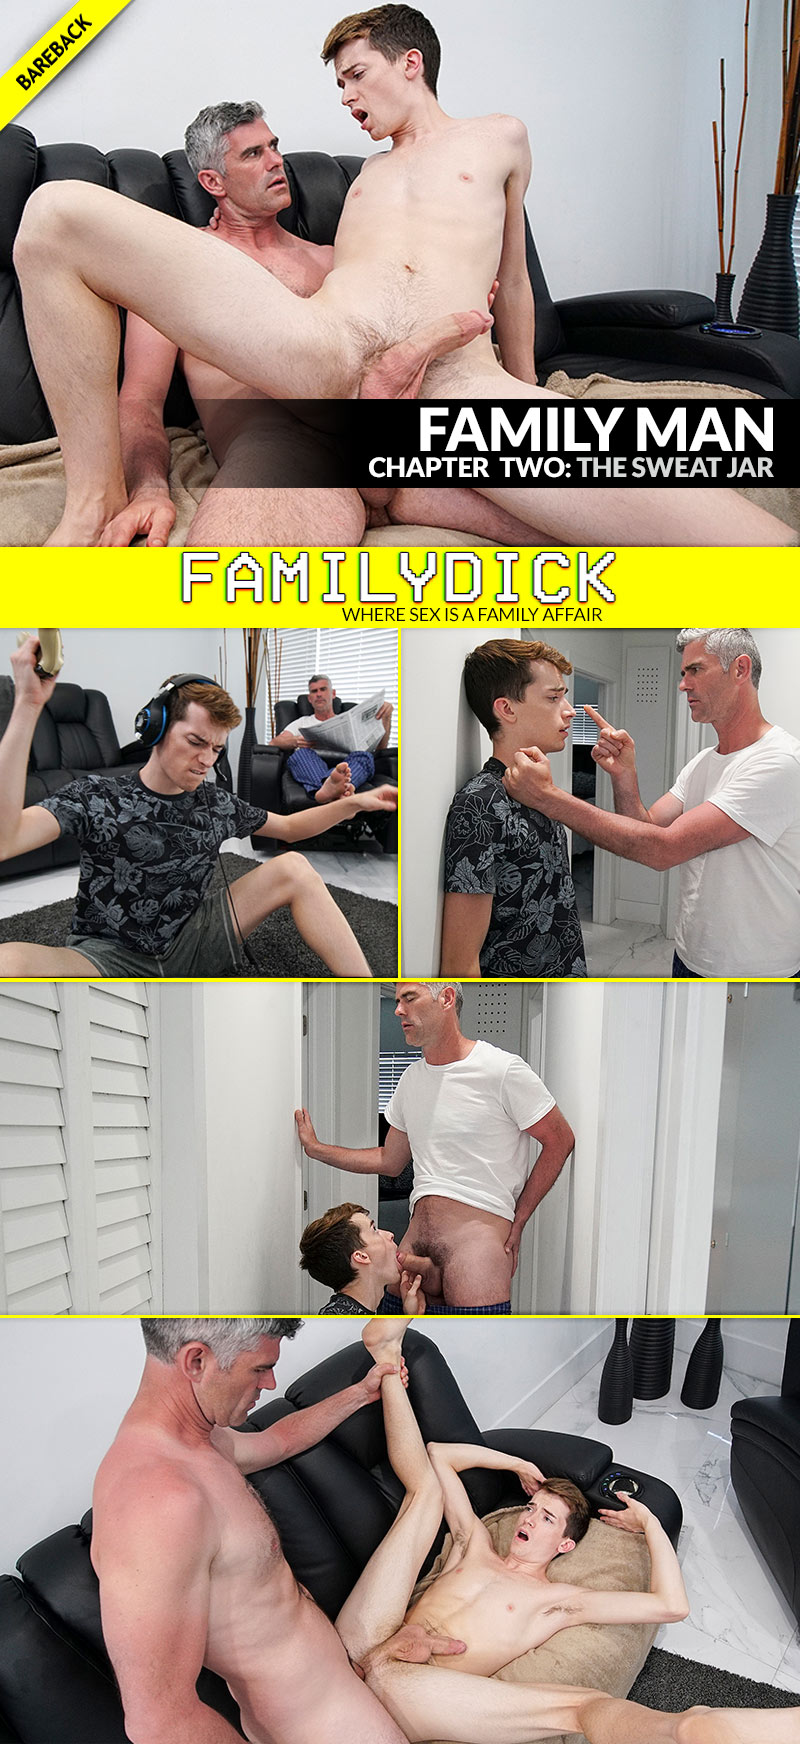 Family Man: THE SWEAT JAR, Chapter Two (with Alex Meyer and Bill) at FamilyDick